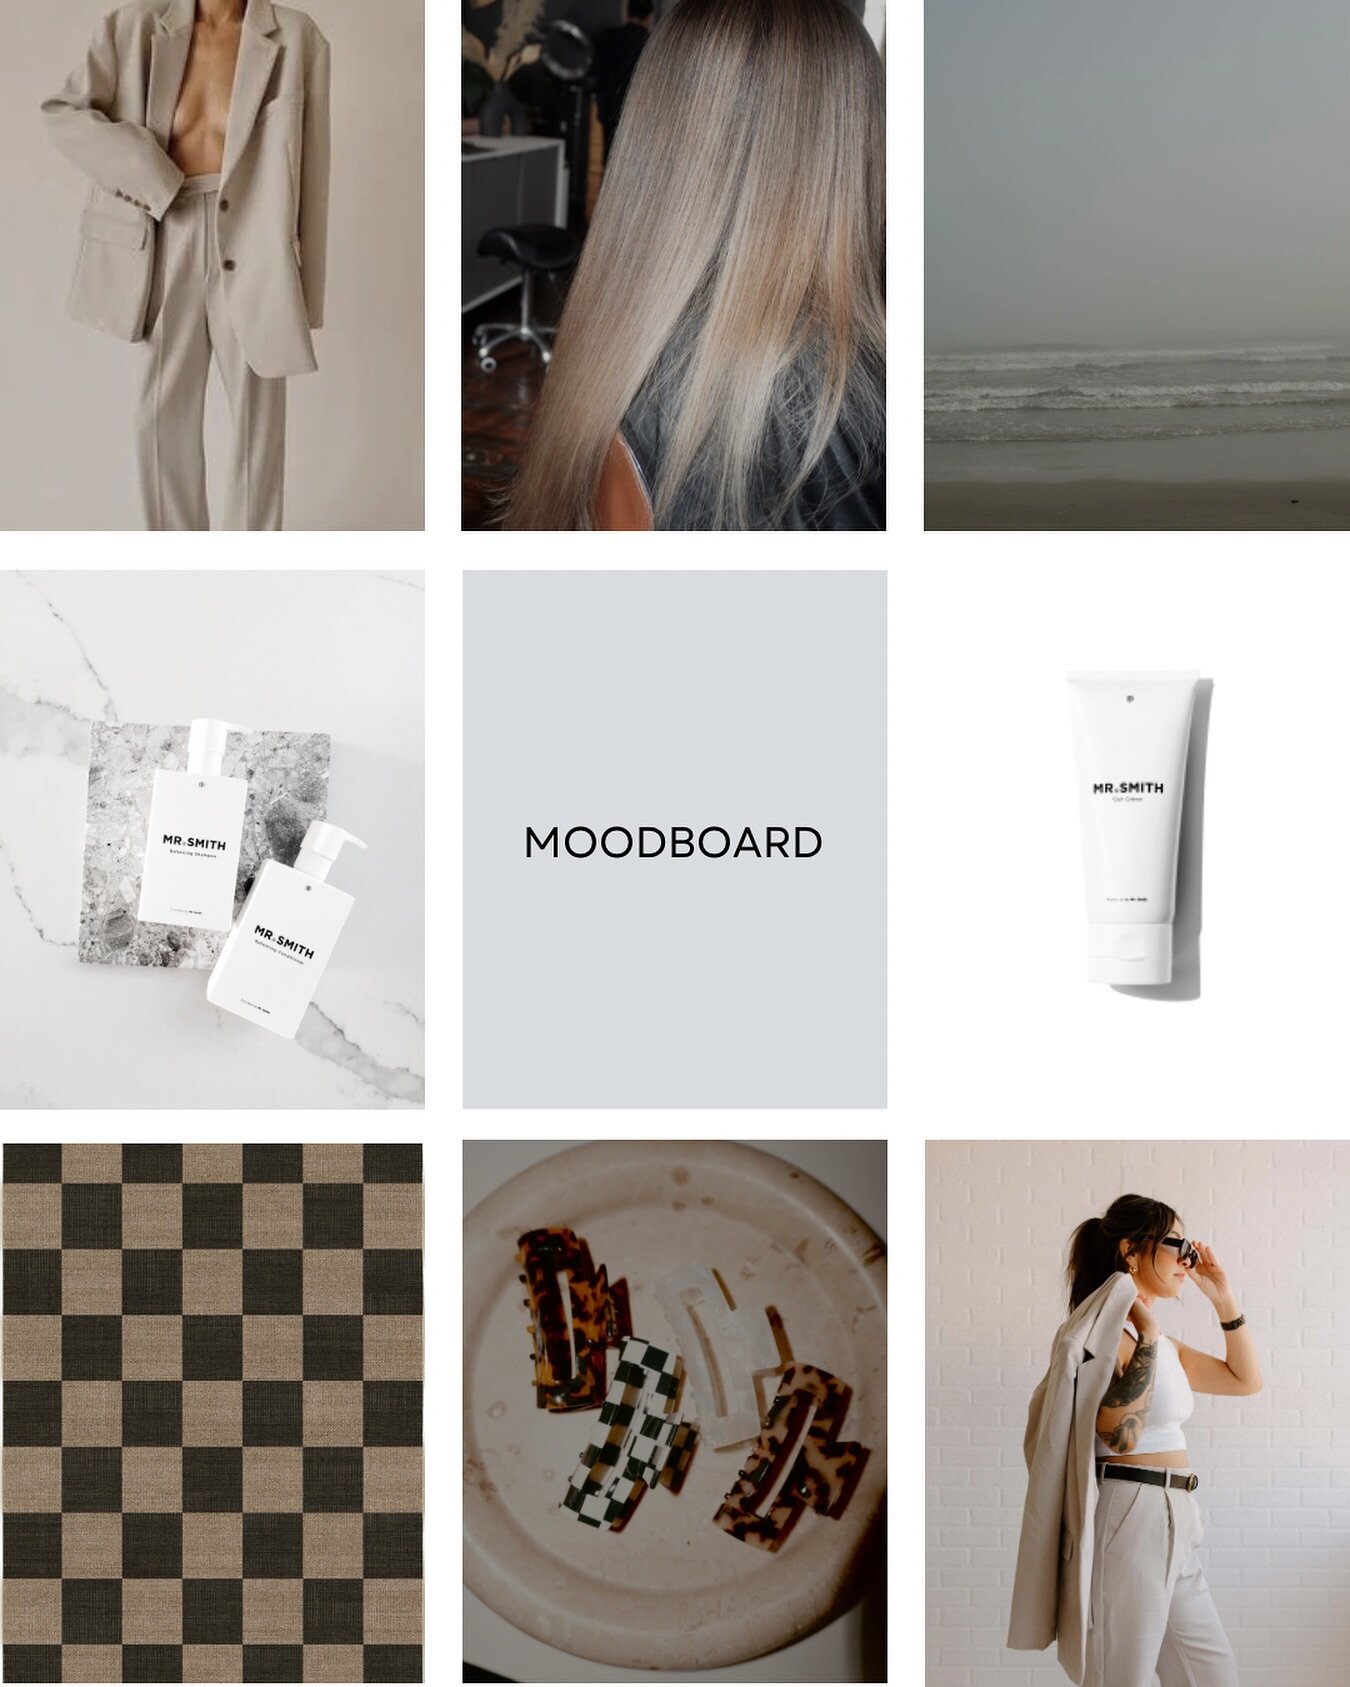 as soon as we realized the time changed it&rsquo;s like a burst of creativity came through ✨

#moodboard #fyp #sanantoniotx #sanantoniosalon #hairstylists #creative #springforward